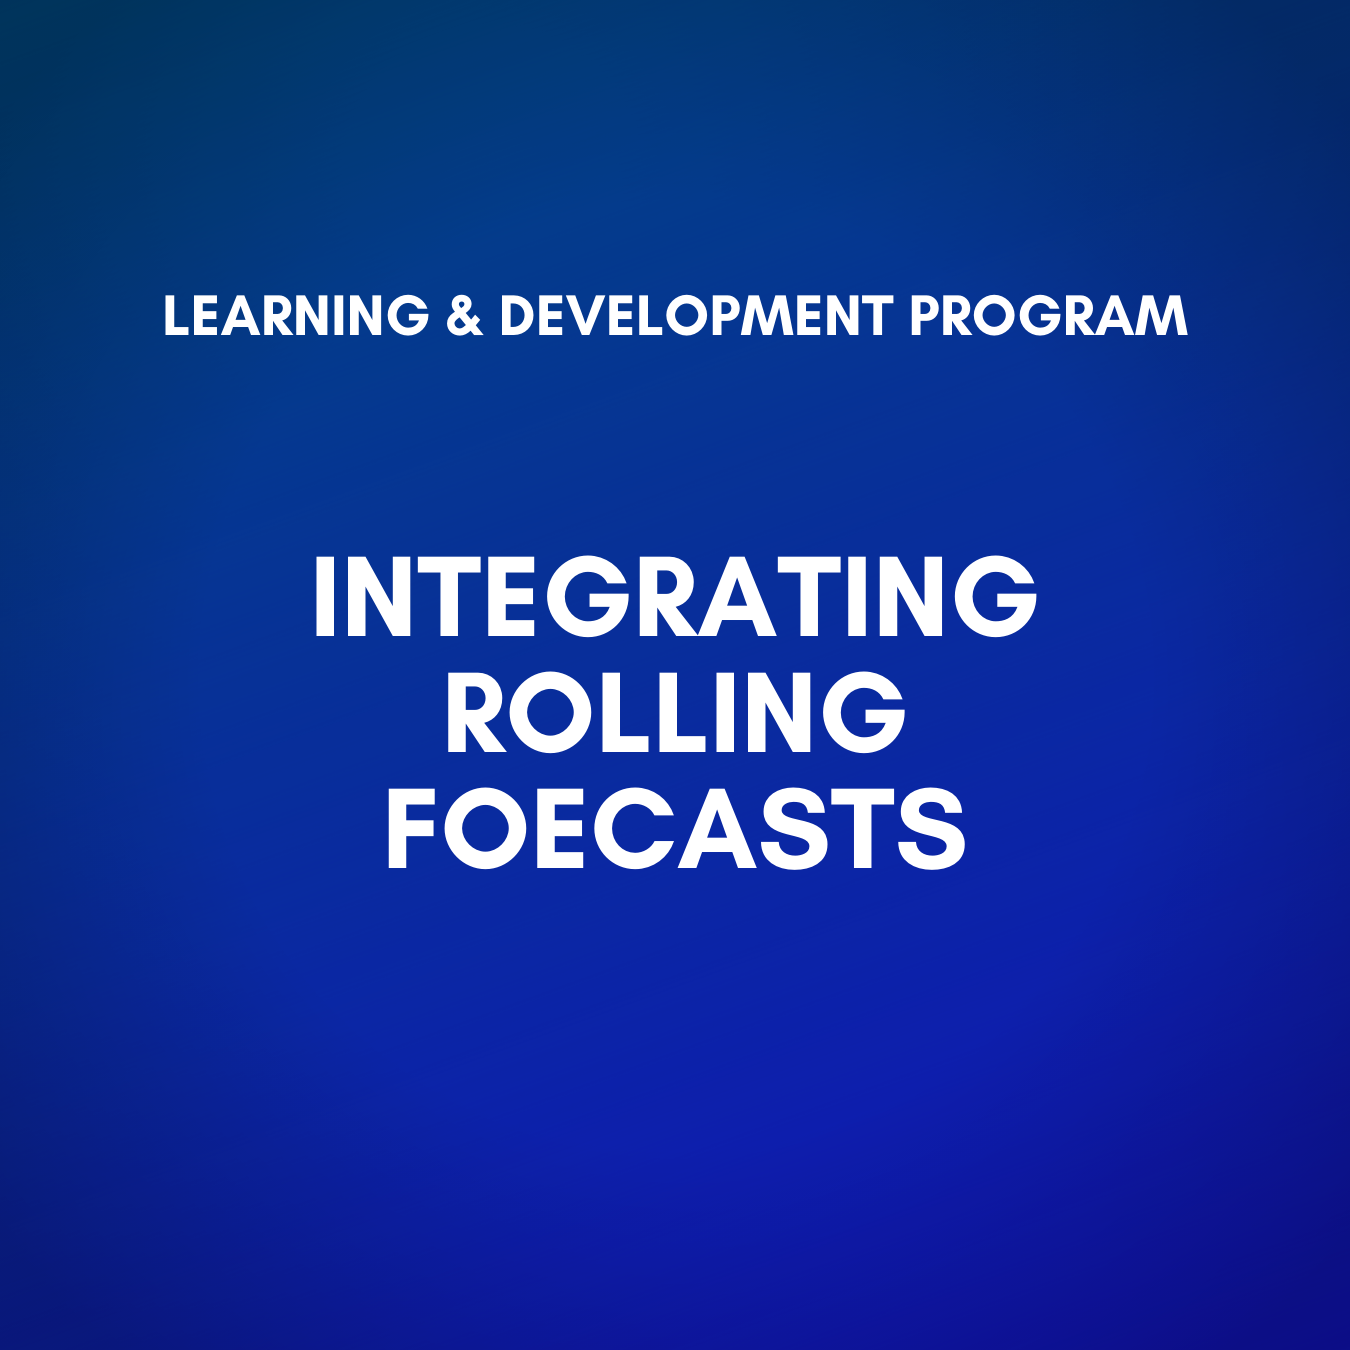 Integrating Rolling Forecasts